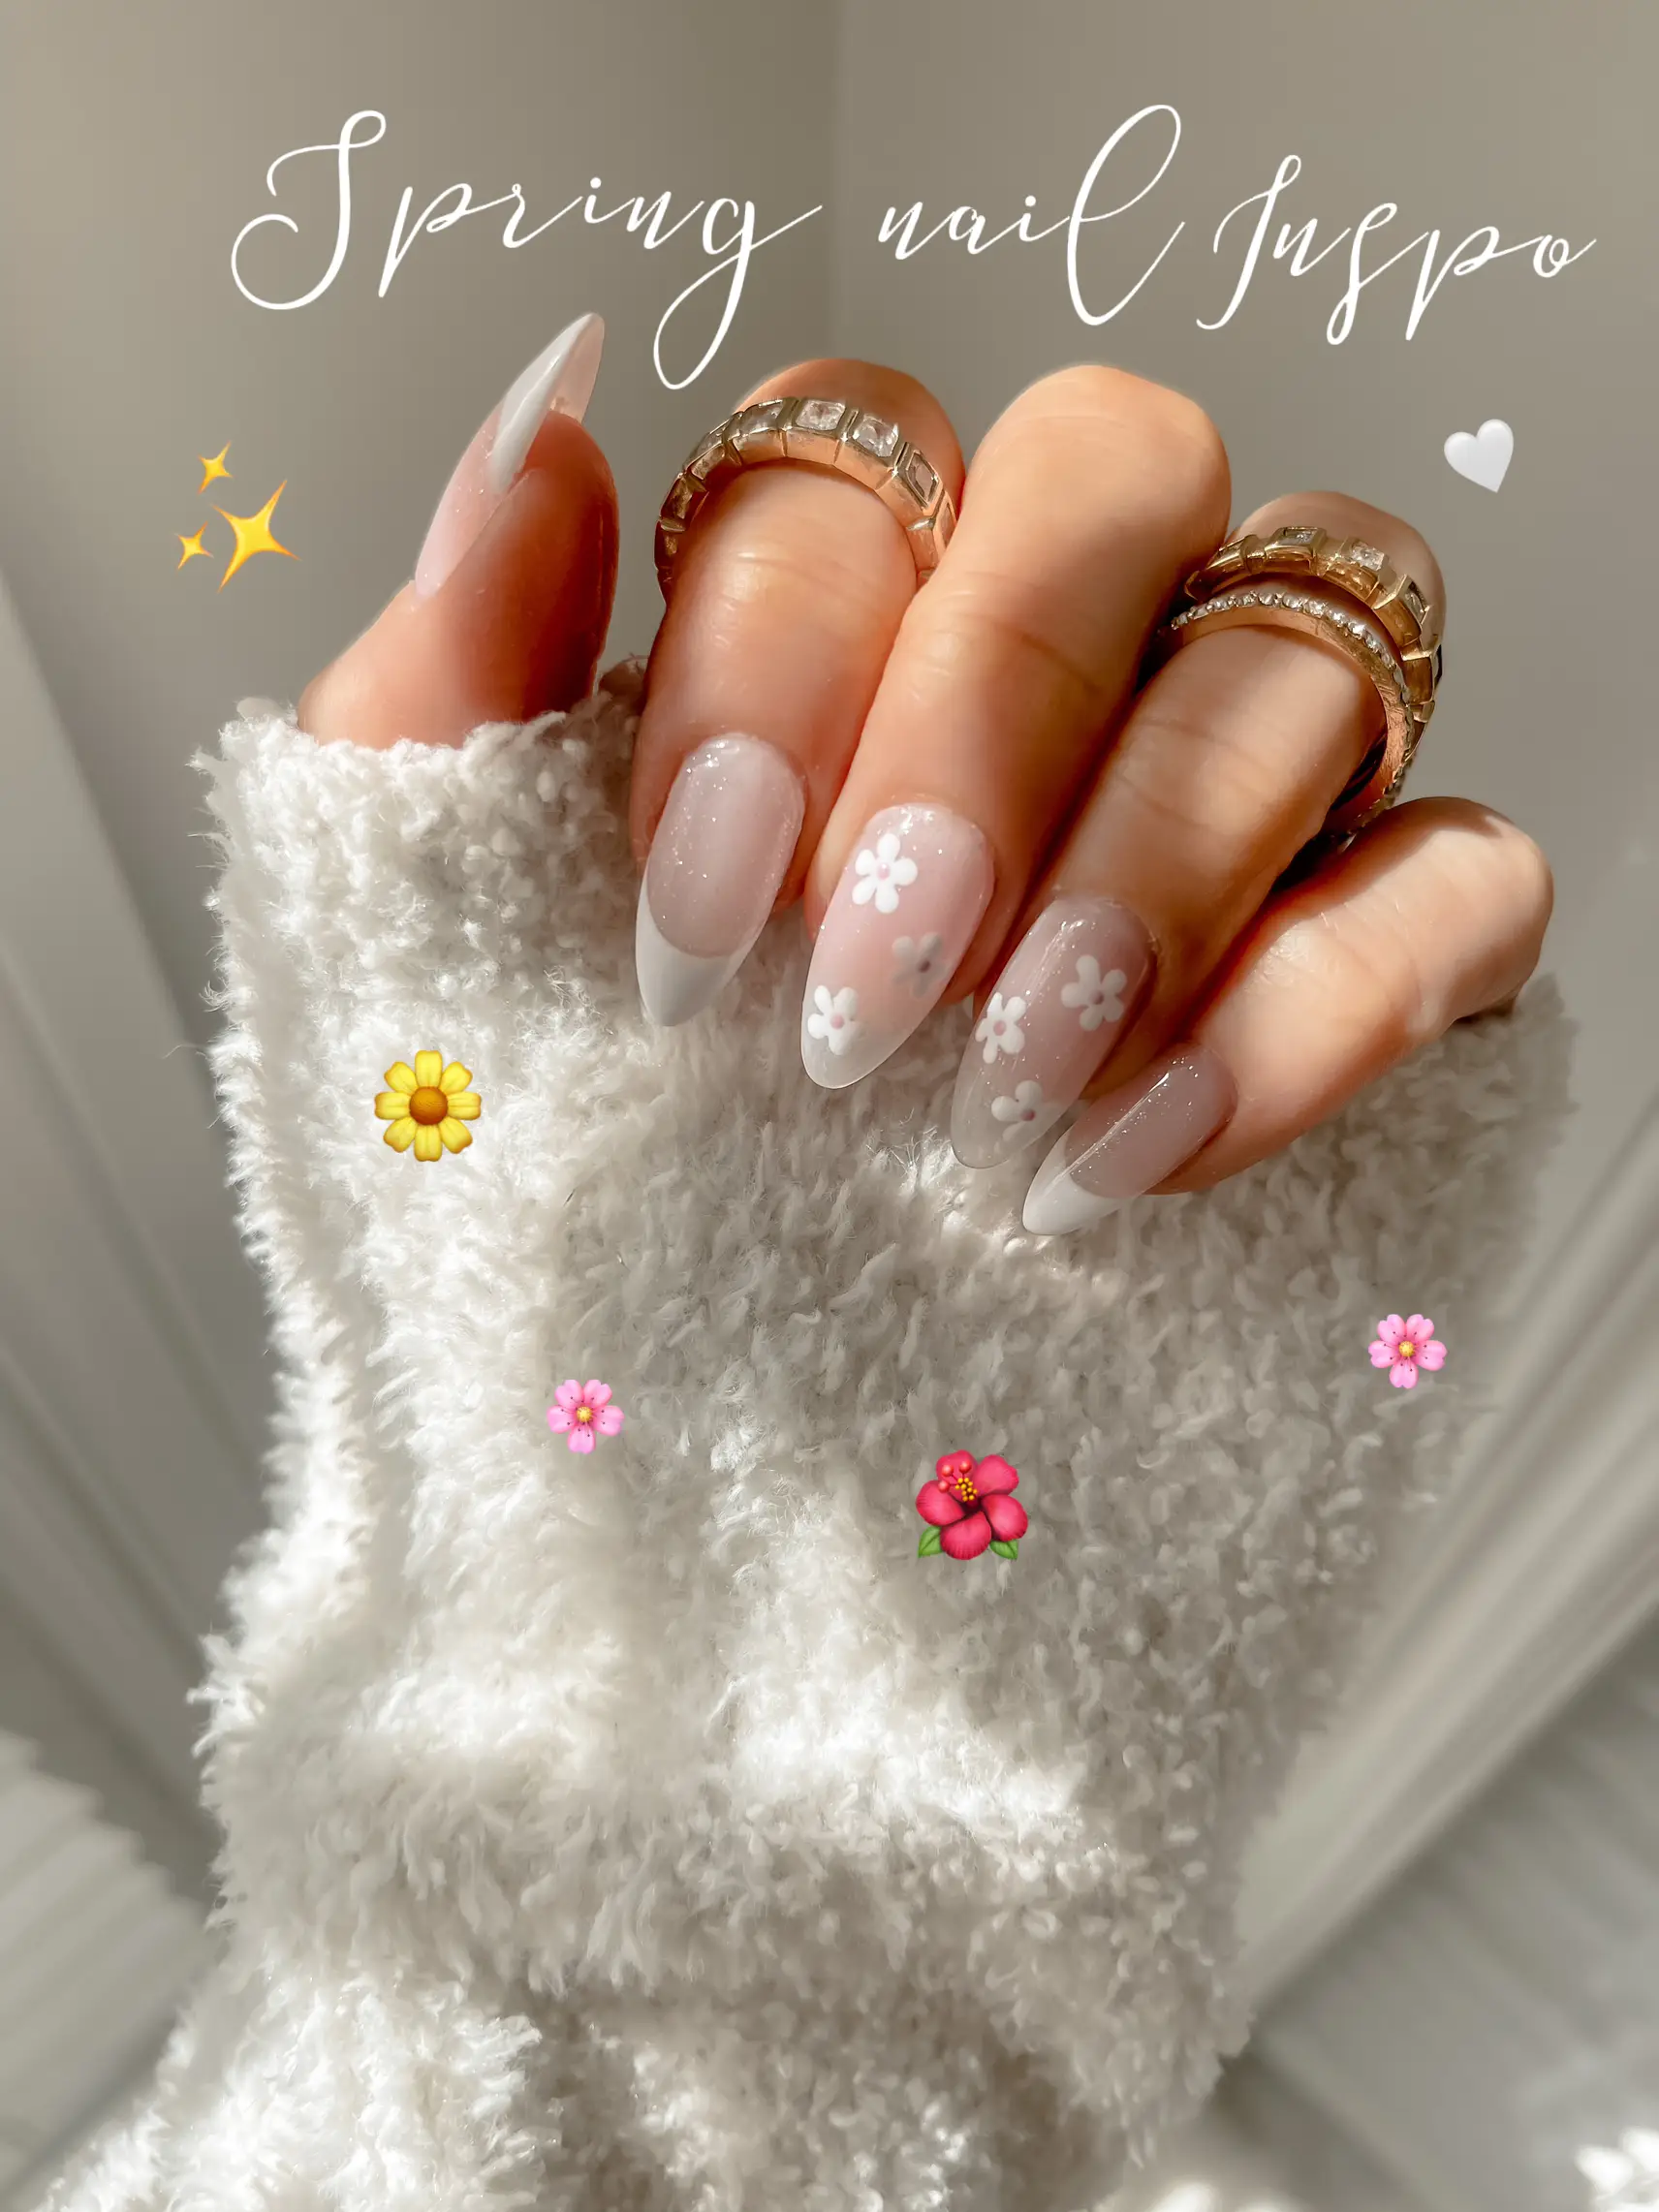 NAIL INSPO AND TIPS, Gallery posted by kayladhollis